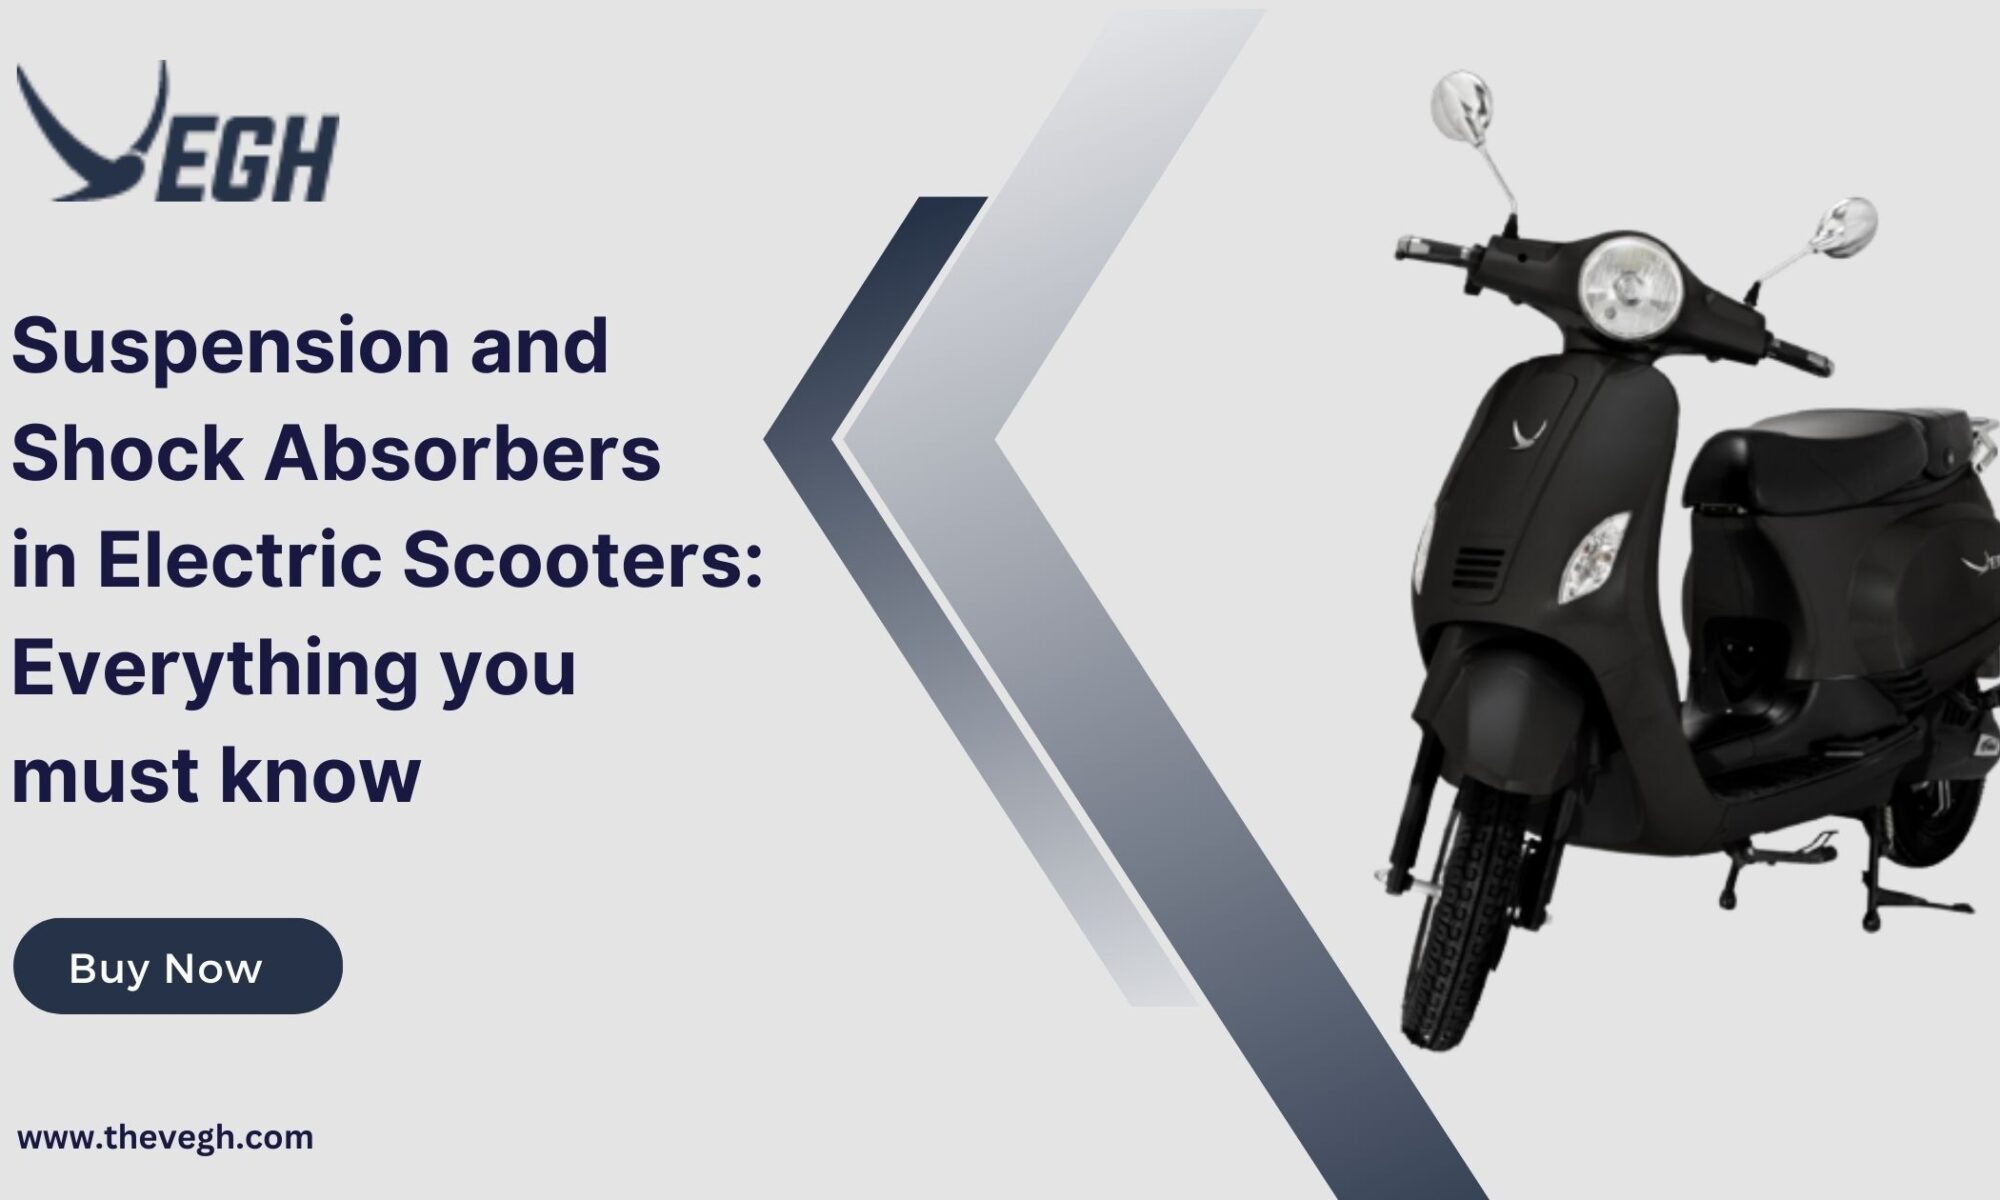 Suspension and Shock Absorbers in Electric Scooters: Everything you must know